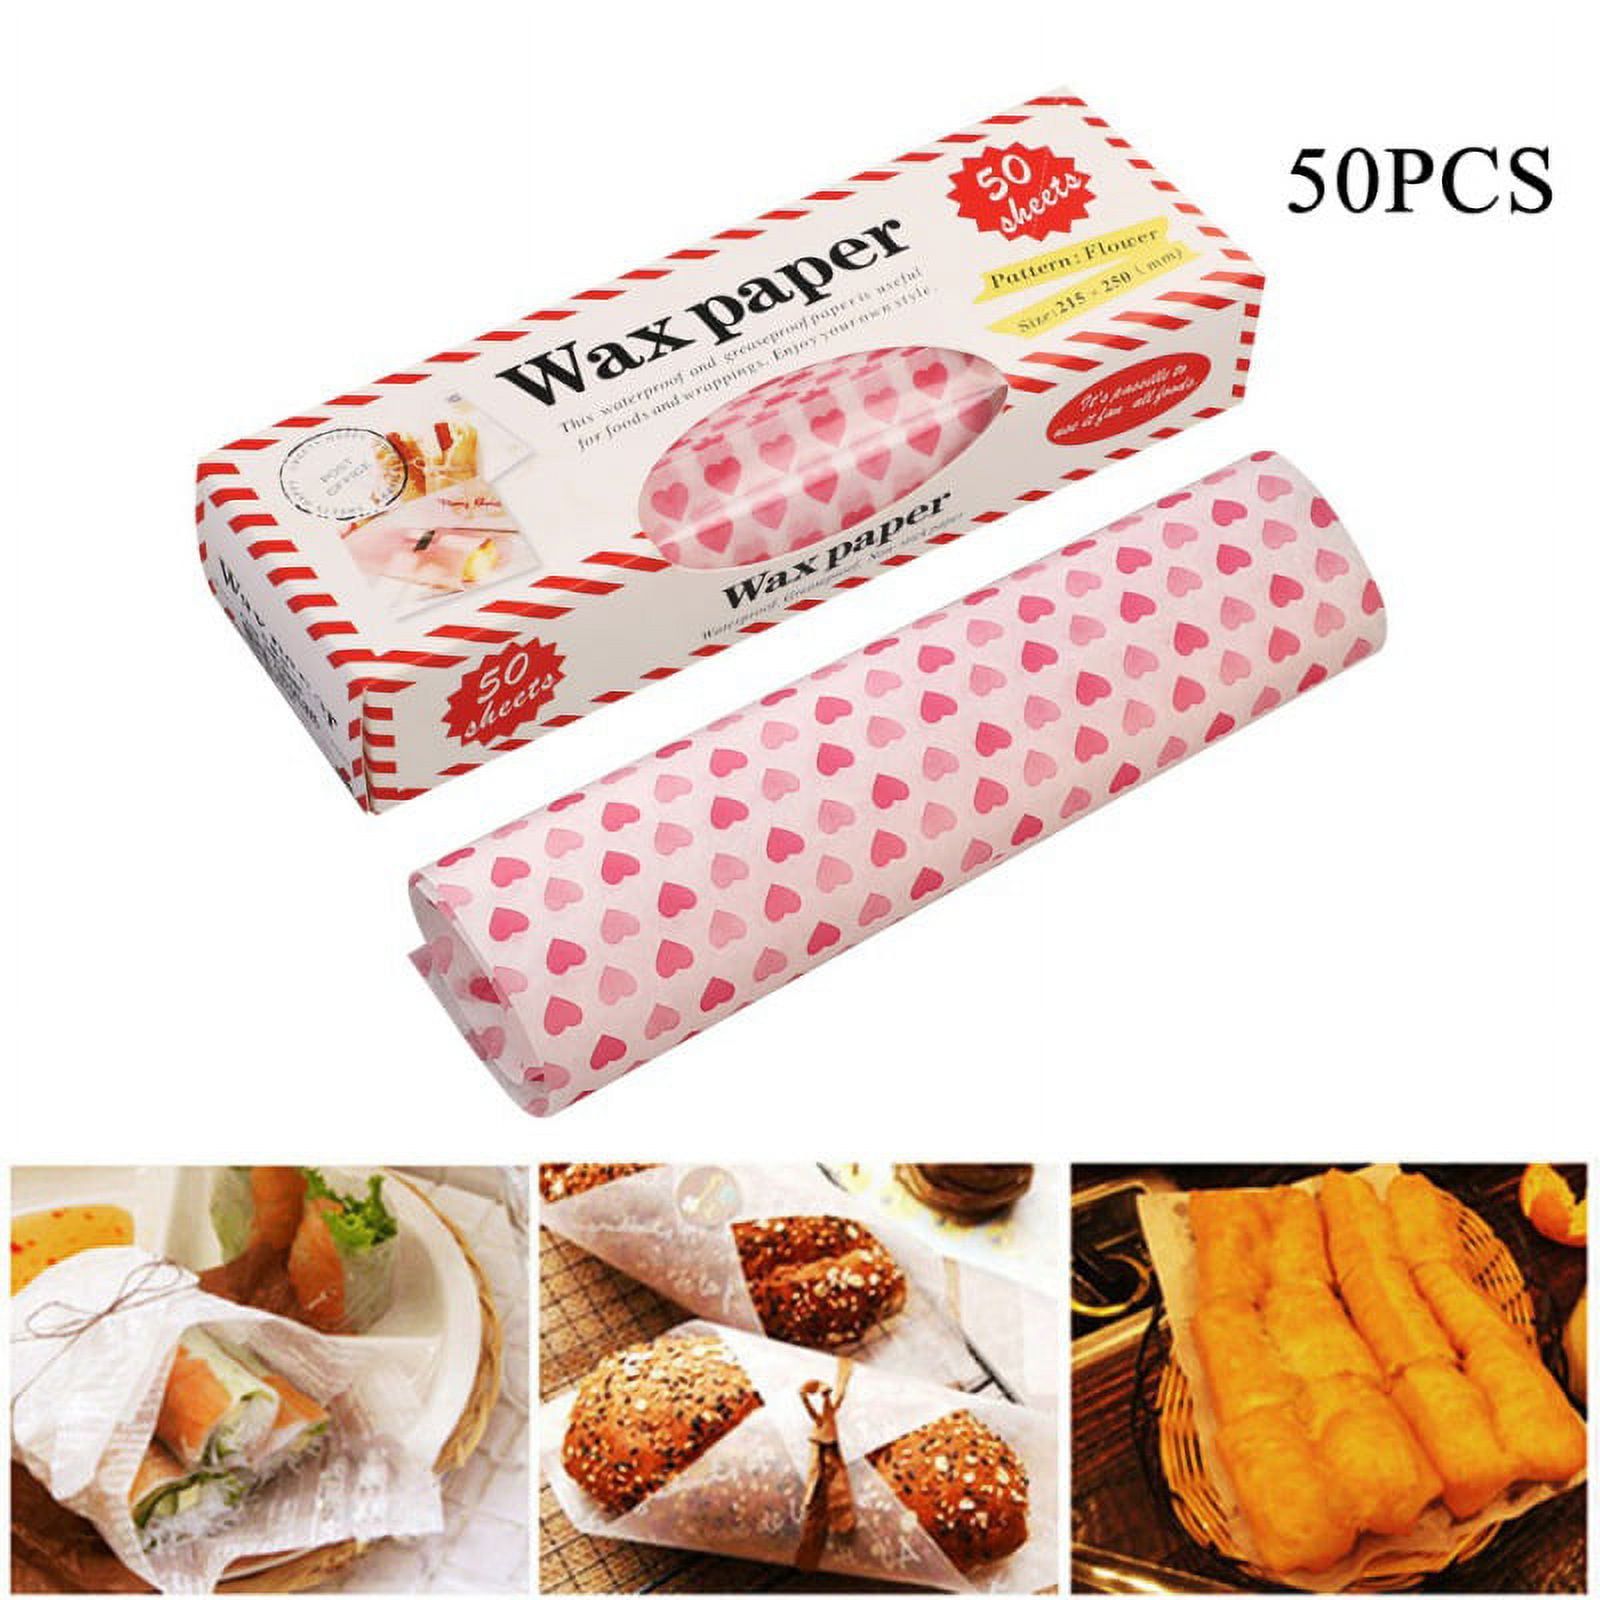  Yuyouqu 50 Sheets Deli Paper Pre Cut Wax Paper Sheets  Disposable Food Basket Liners Grease Proof Sandwich Wrapping Paper Grease  Resistant Food Trays Paper Liner 12 x 12 Inch Brown 